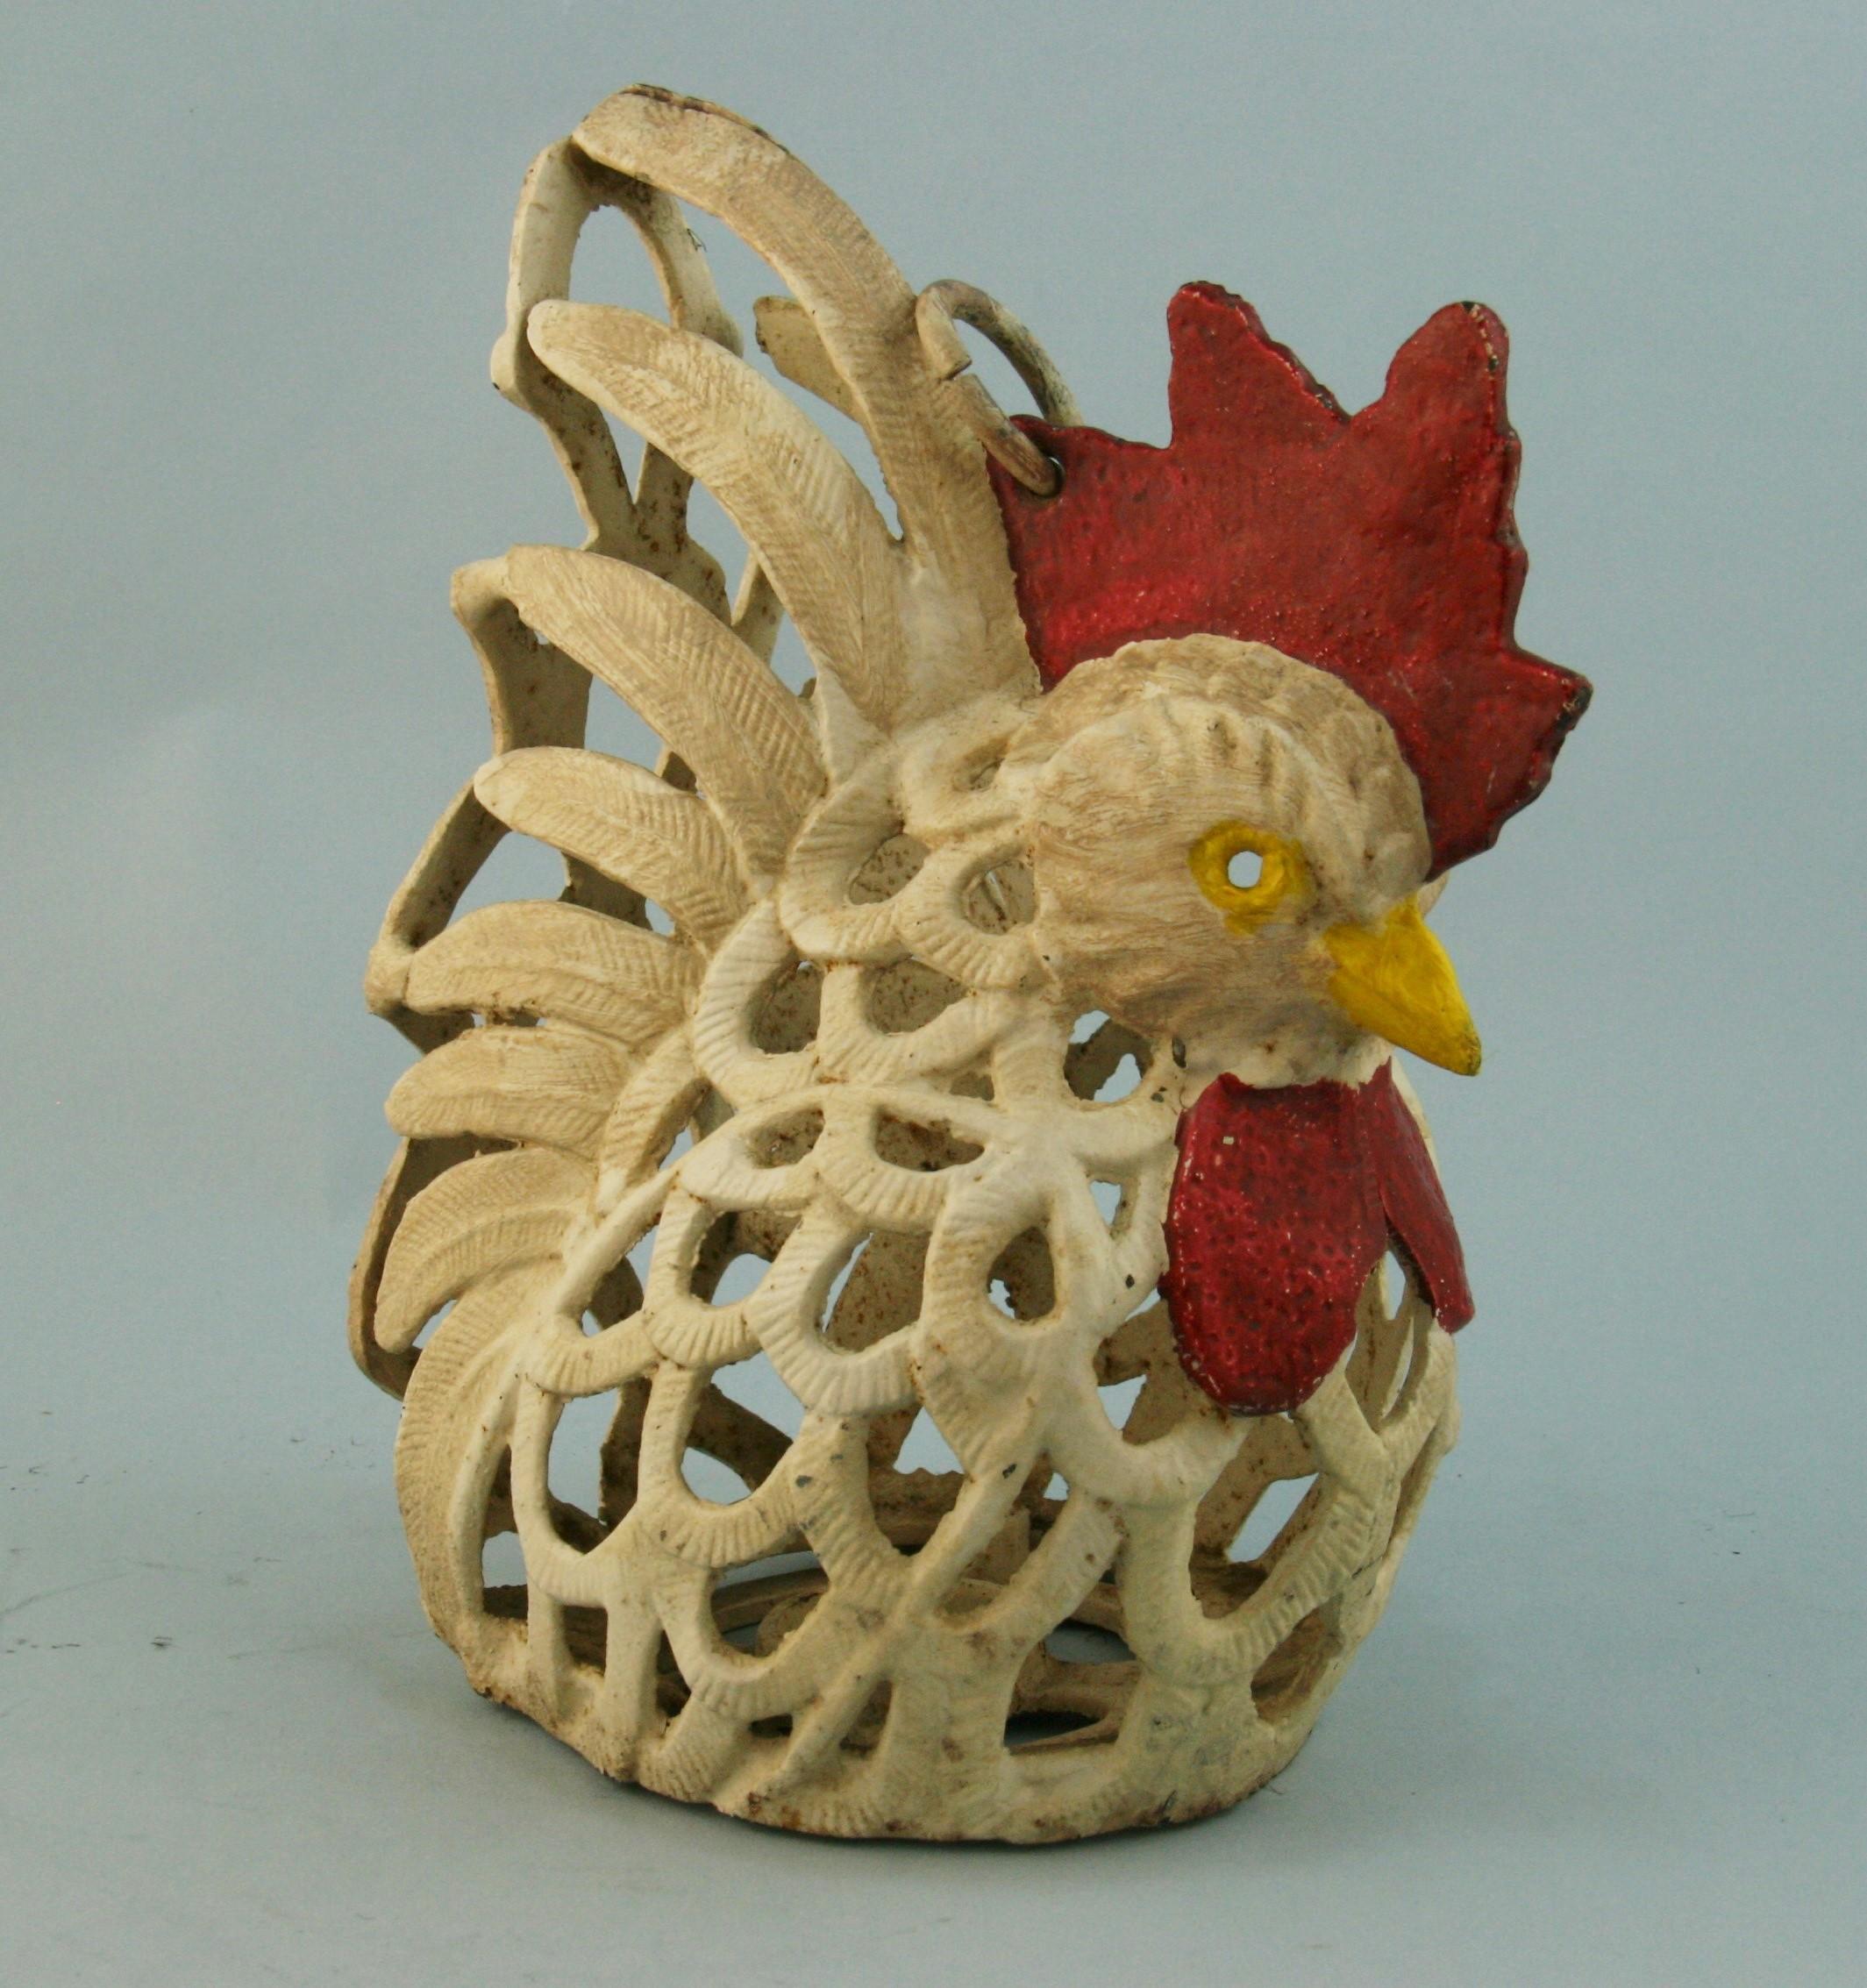 Japanese hand crafted and painted rooster garden lighting lantern decorative sculpture